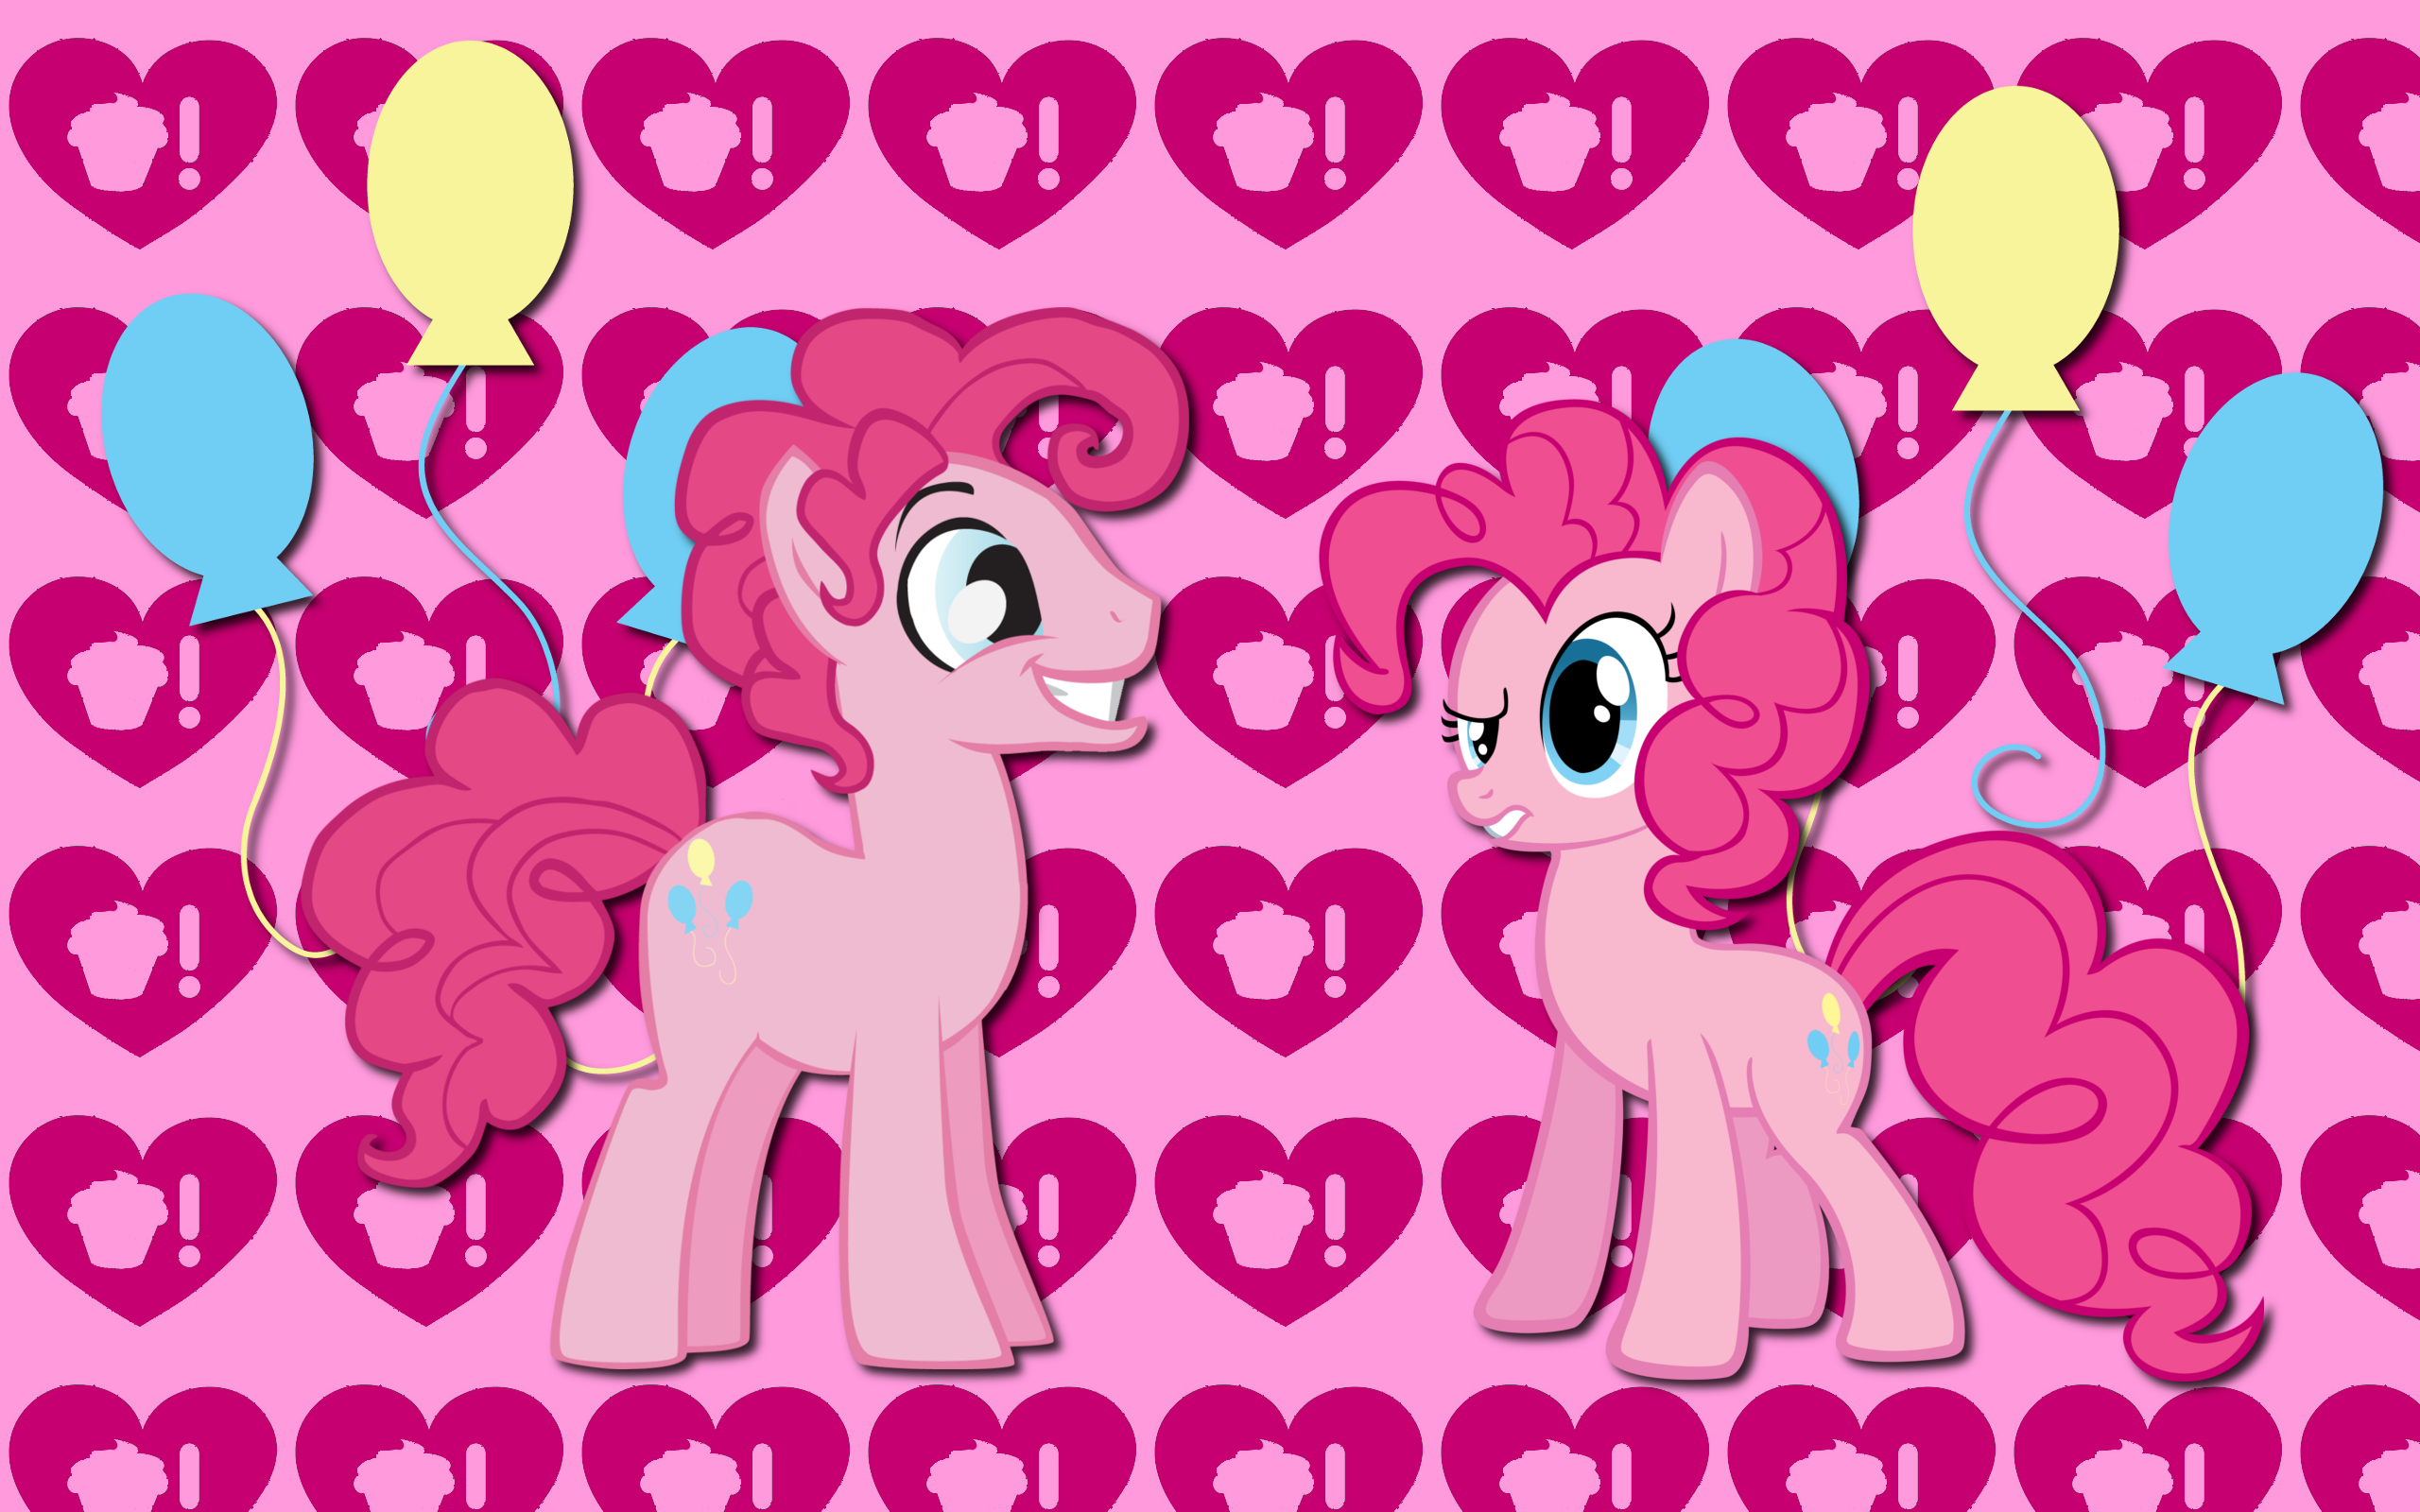 BB and PP wallpaper by AliceHumanSacrifice0, MoongazePonies and Trotsworth